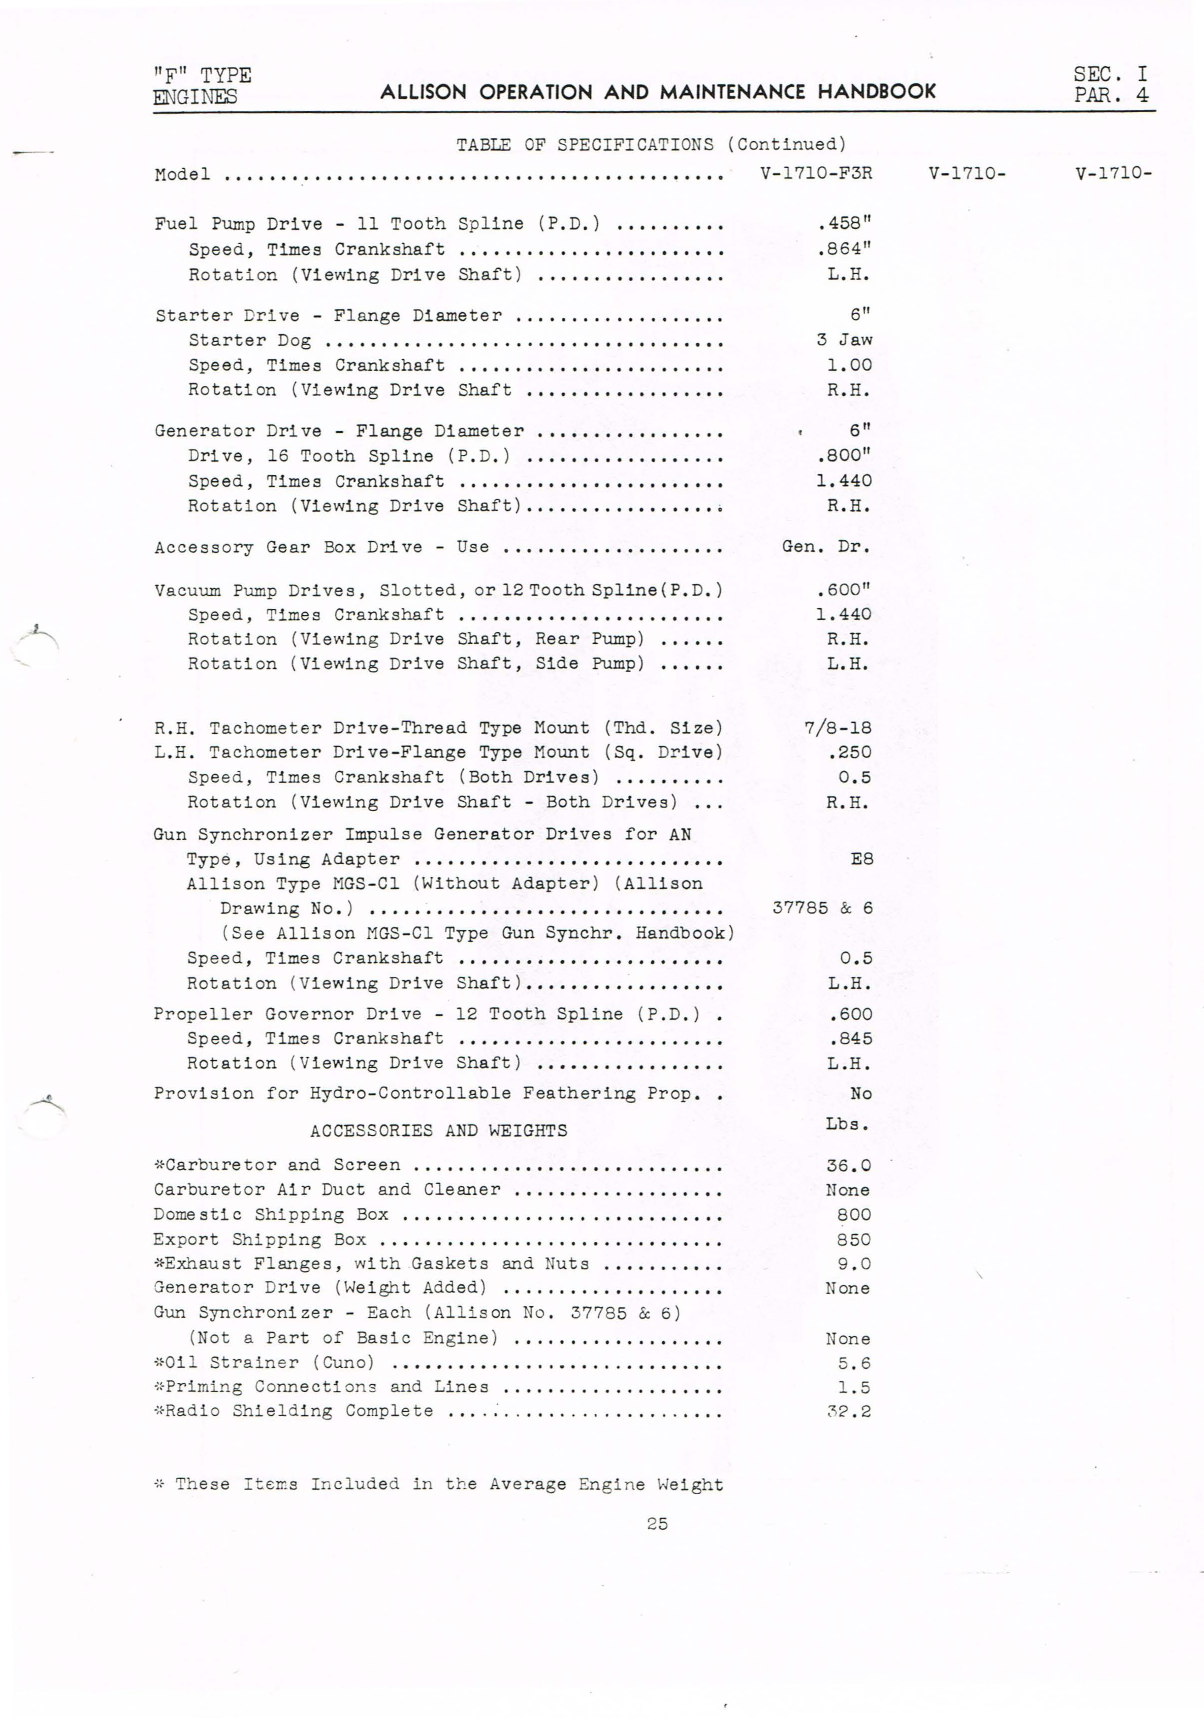 Sample page 7 from AirCorps Library document: Operation, Maintenance and Overhaul for Allison V-1710-F Engines